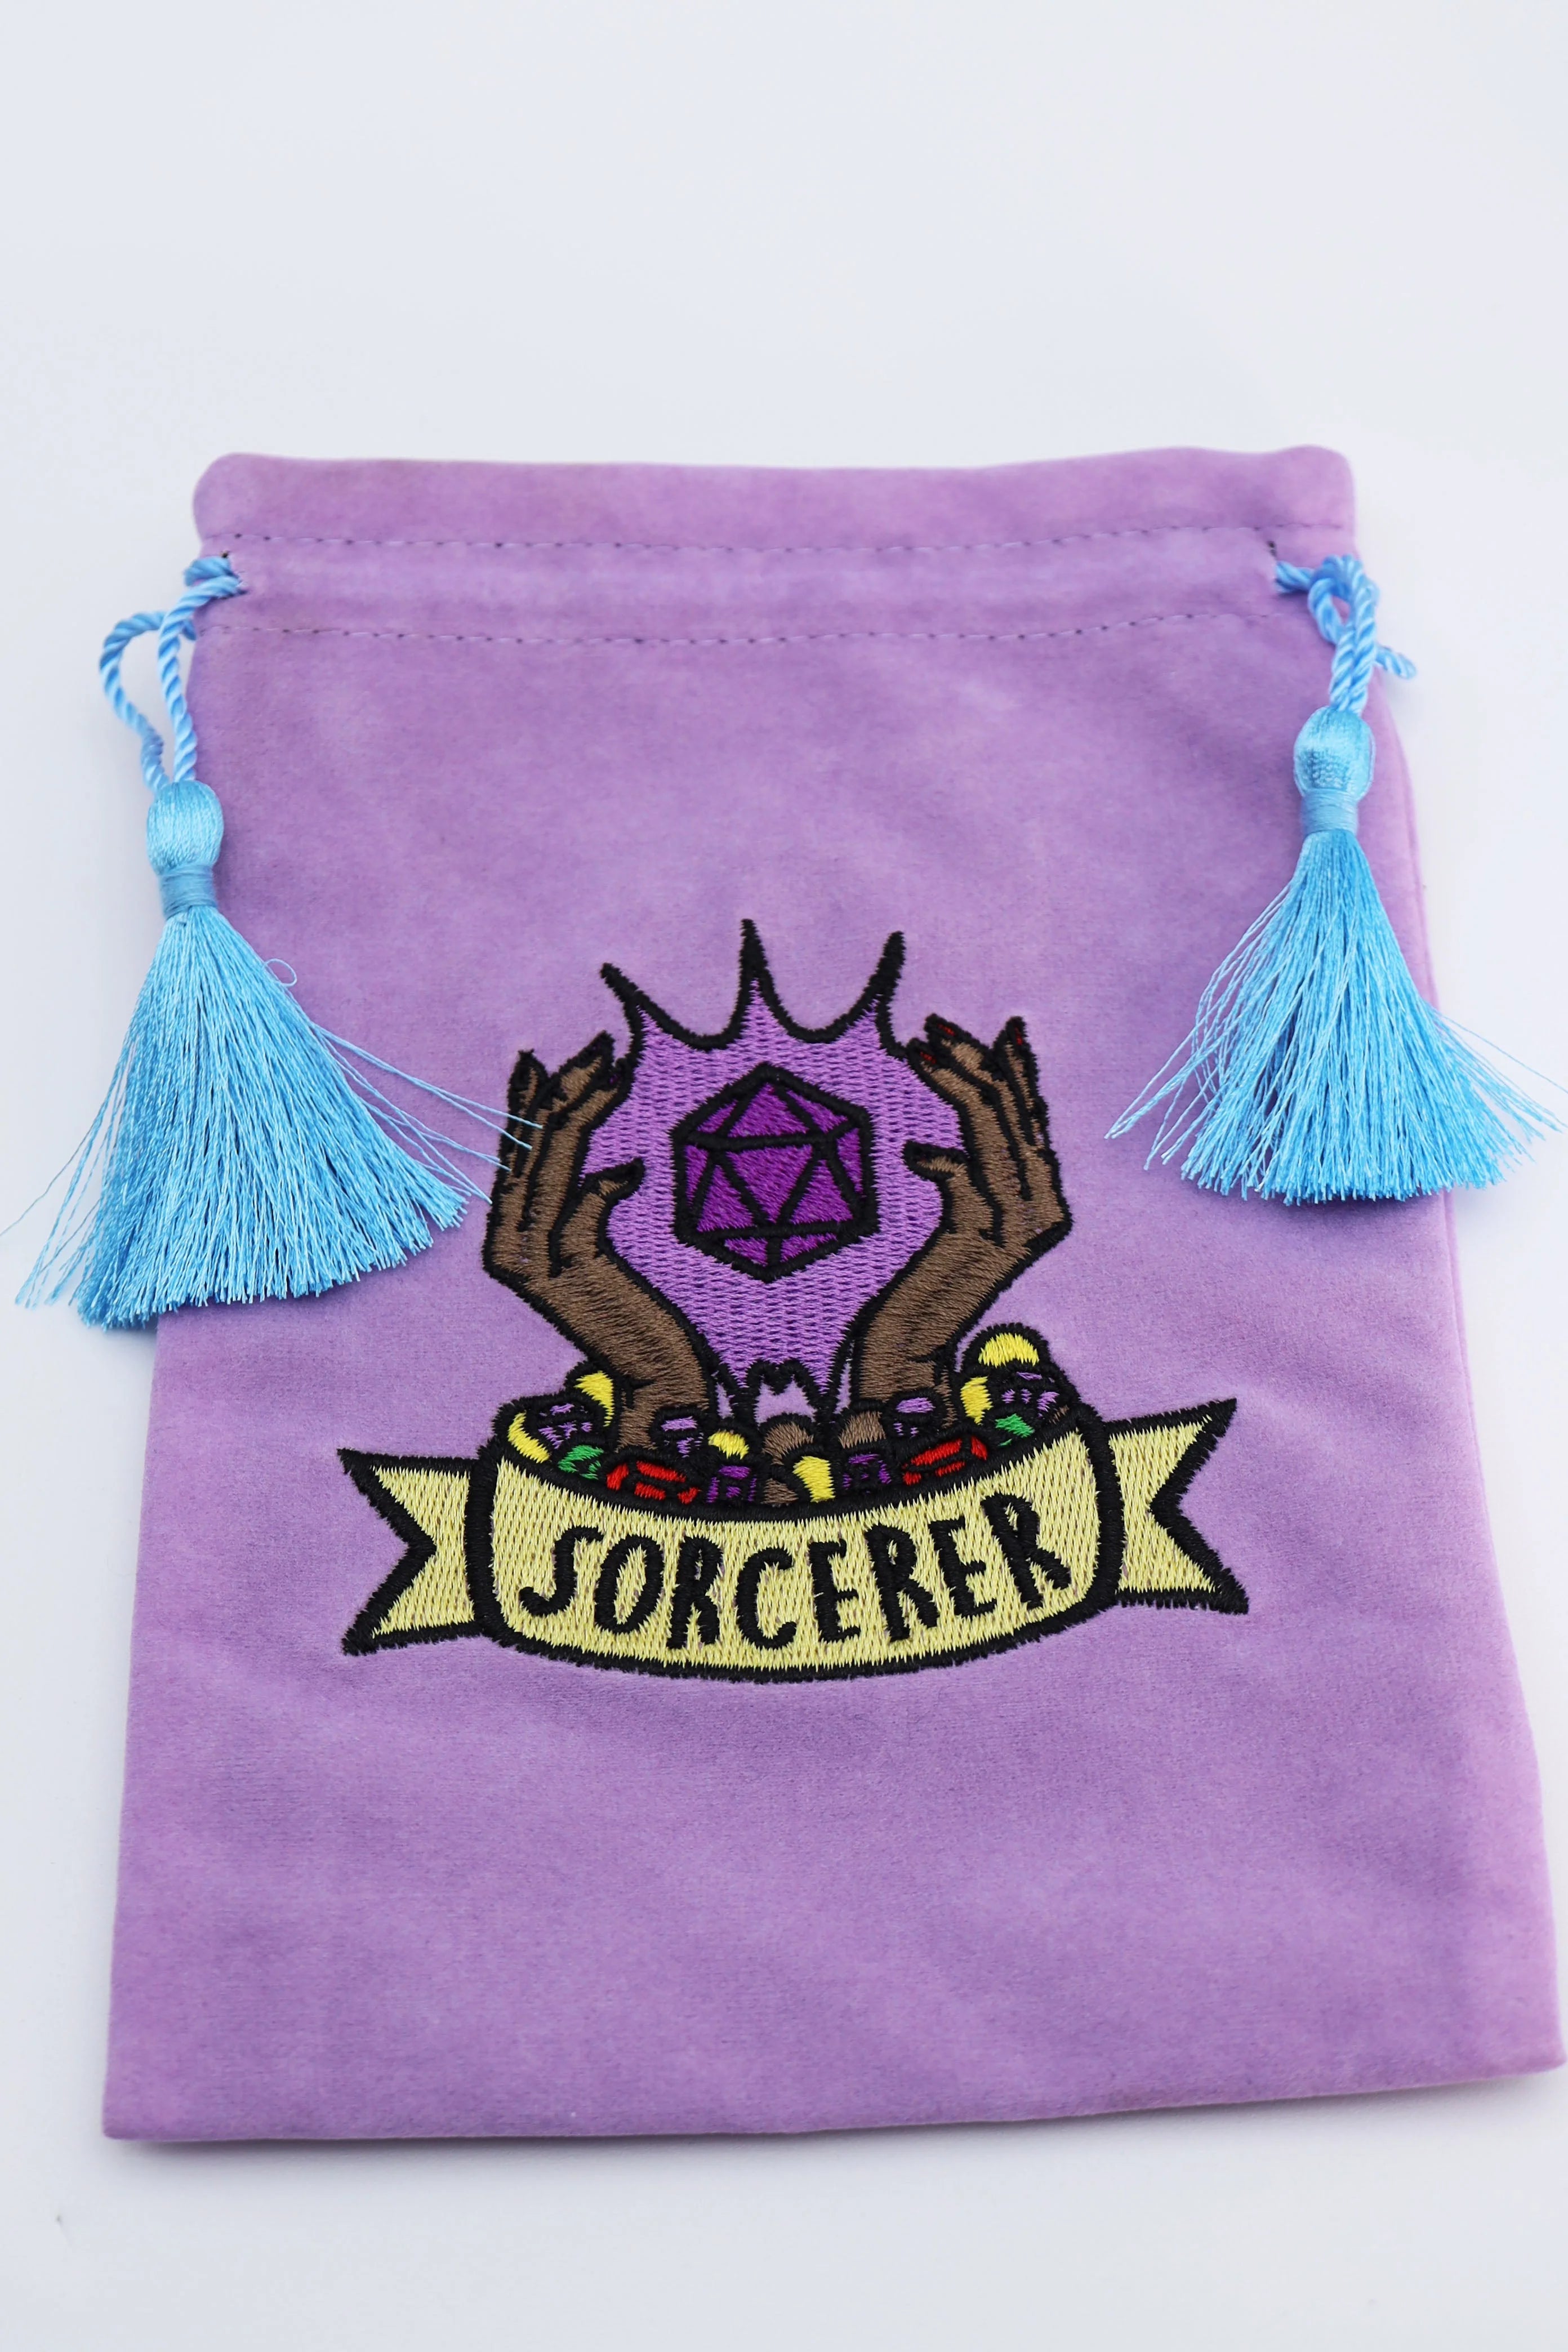 DICE BAG - SORCERER Dice & Counters Foam Brain Games    | Red Claw Gaming